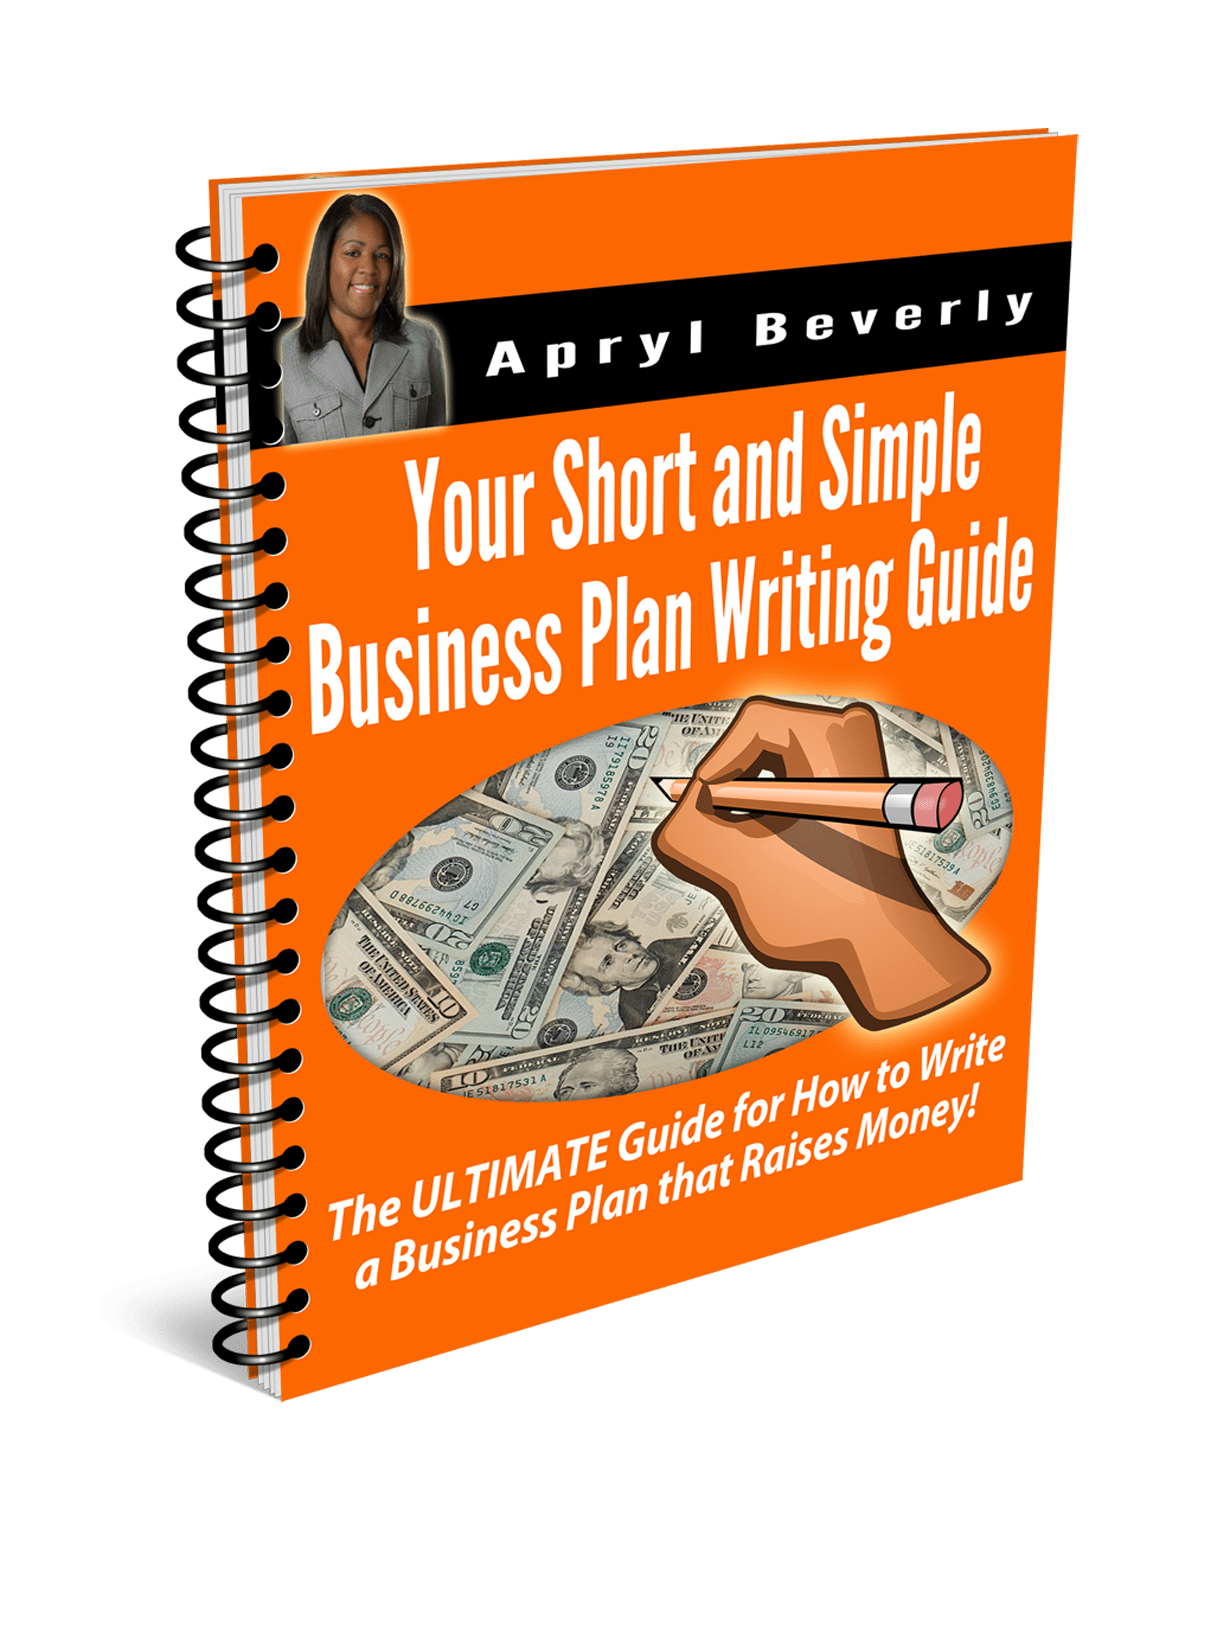 How to write a One-page Business Plan